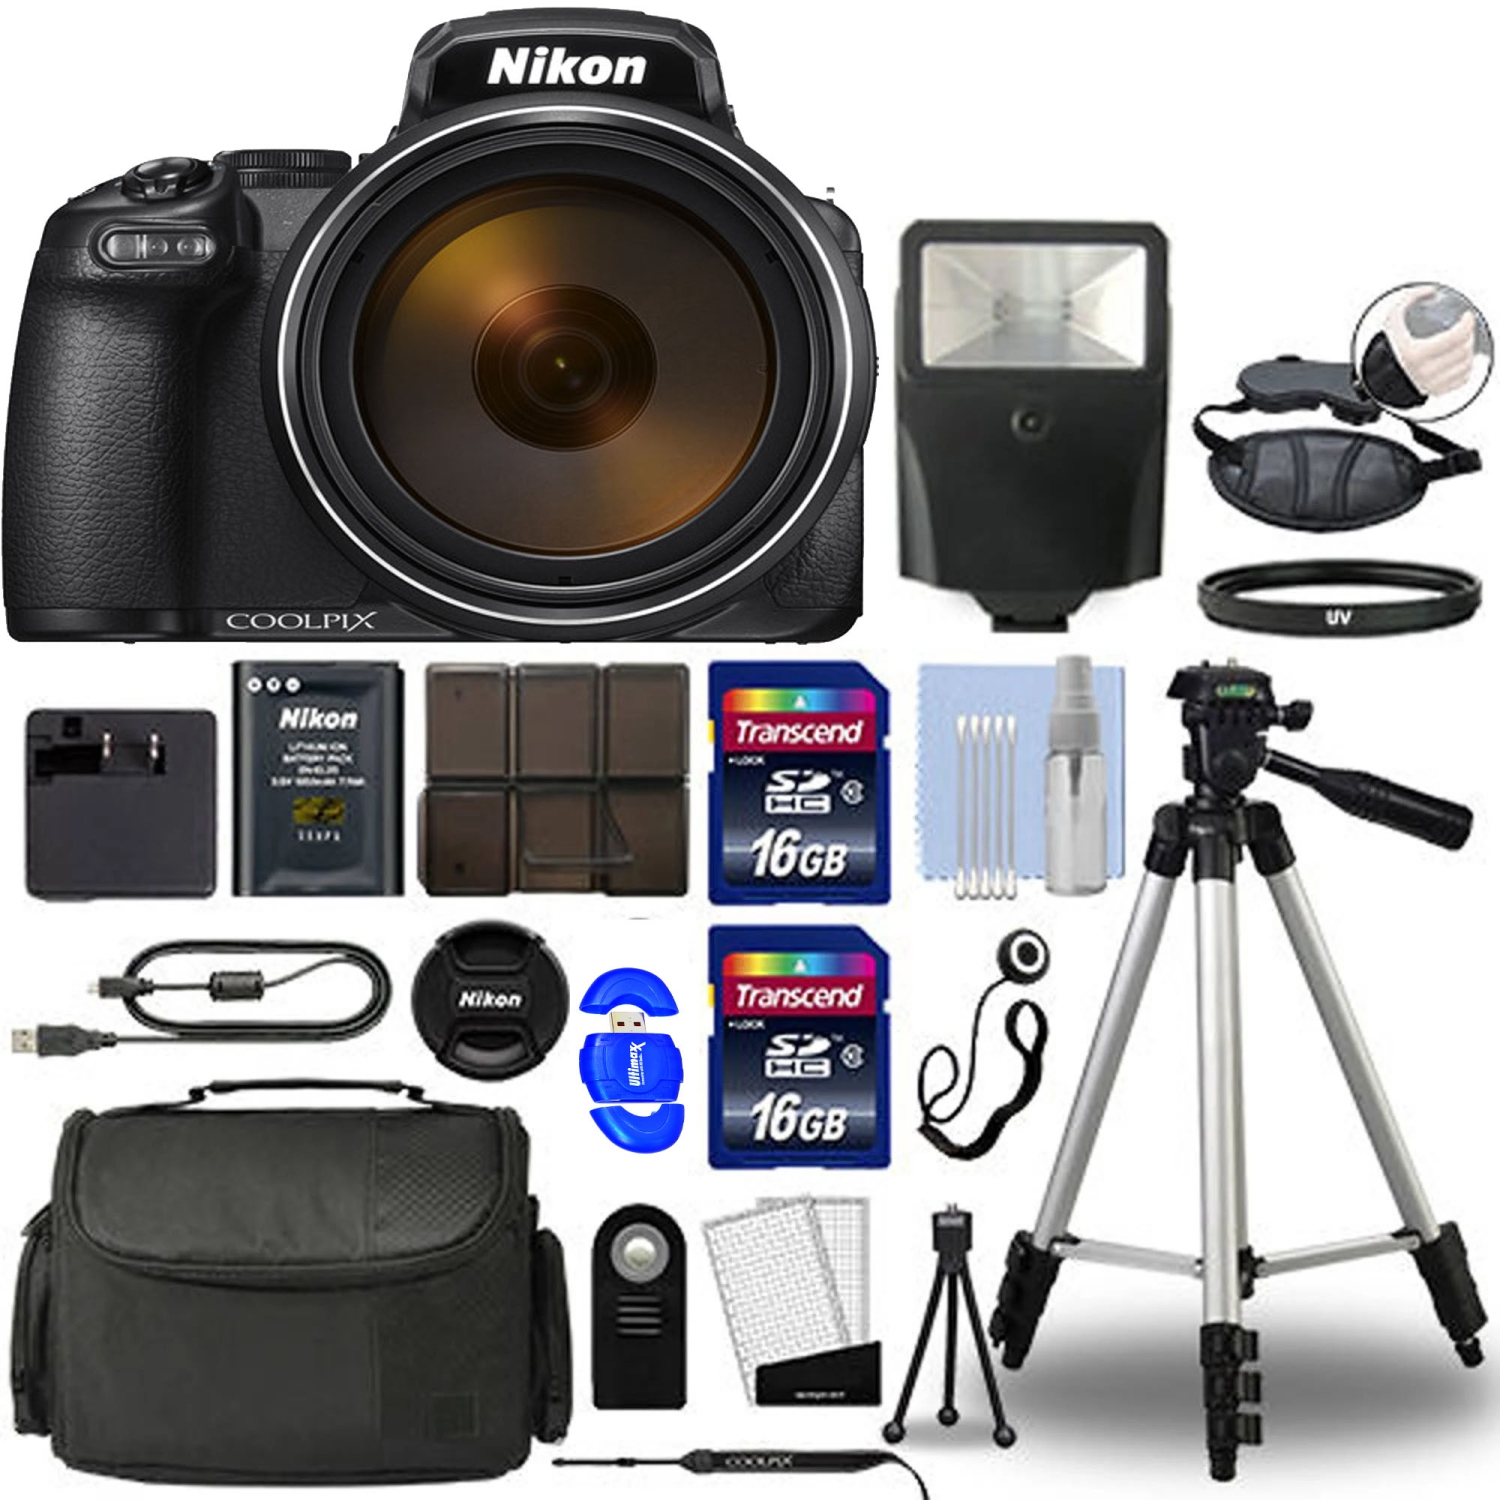 Nikon COOLPIX P1000 Digital Camera with Professional Additional Accessories - US Version w/ Seller Warranty